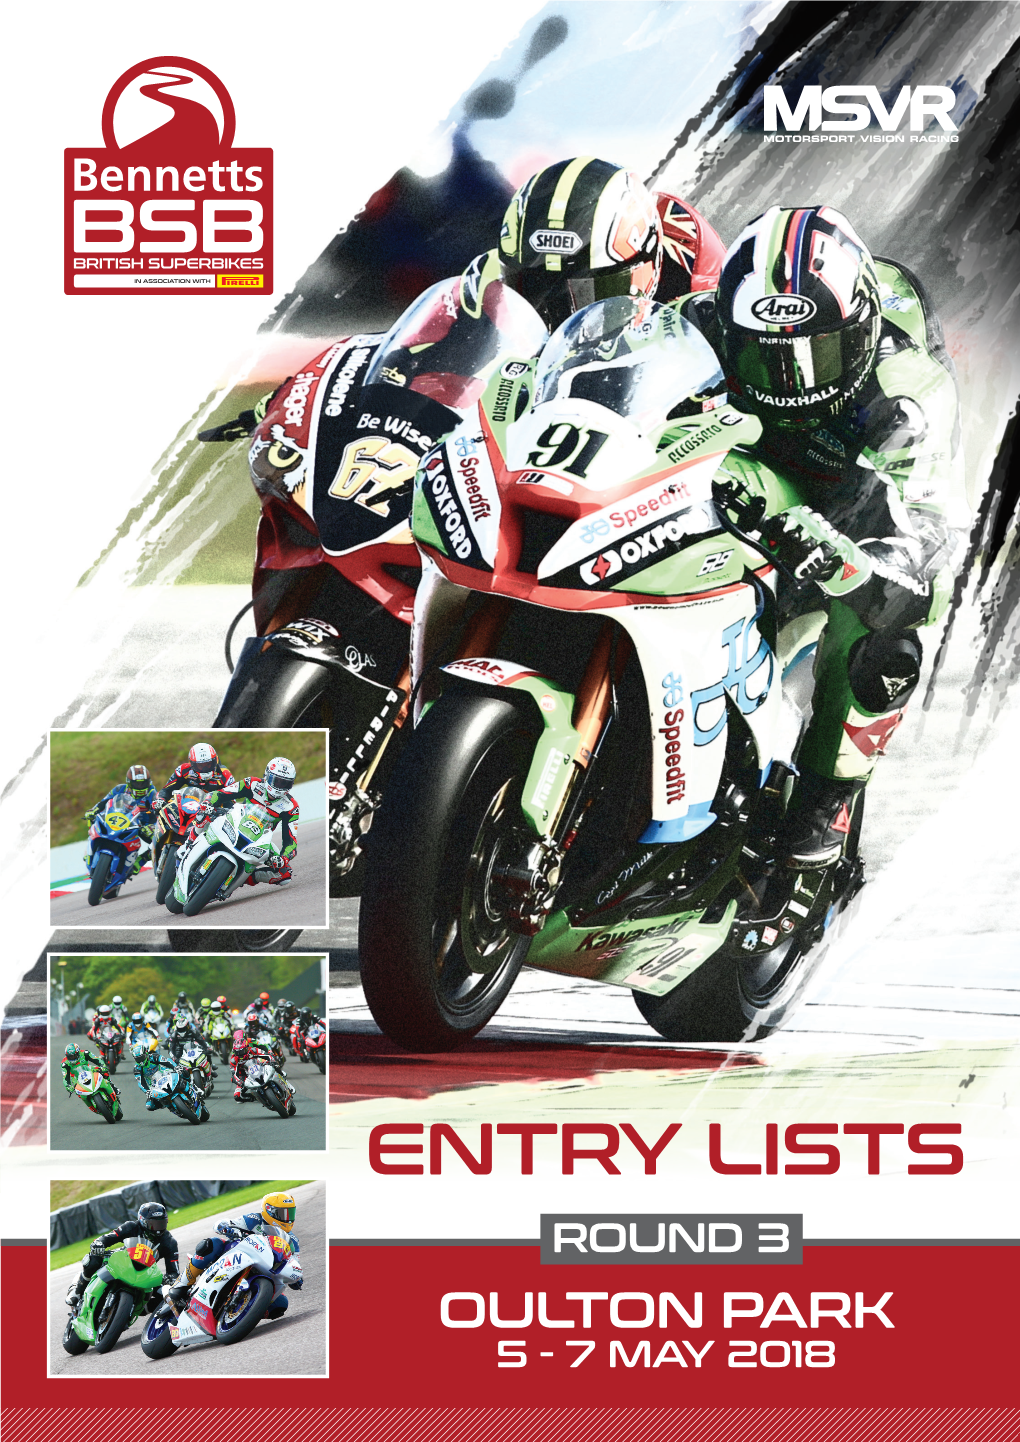 Entry Lists Round 3 Oulton Park 5 - 7 May 2018